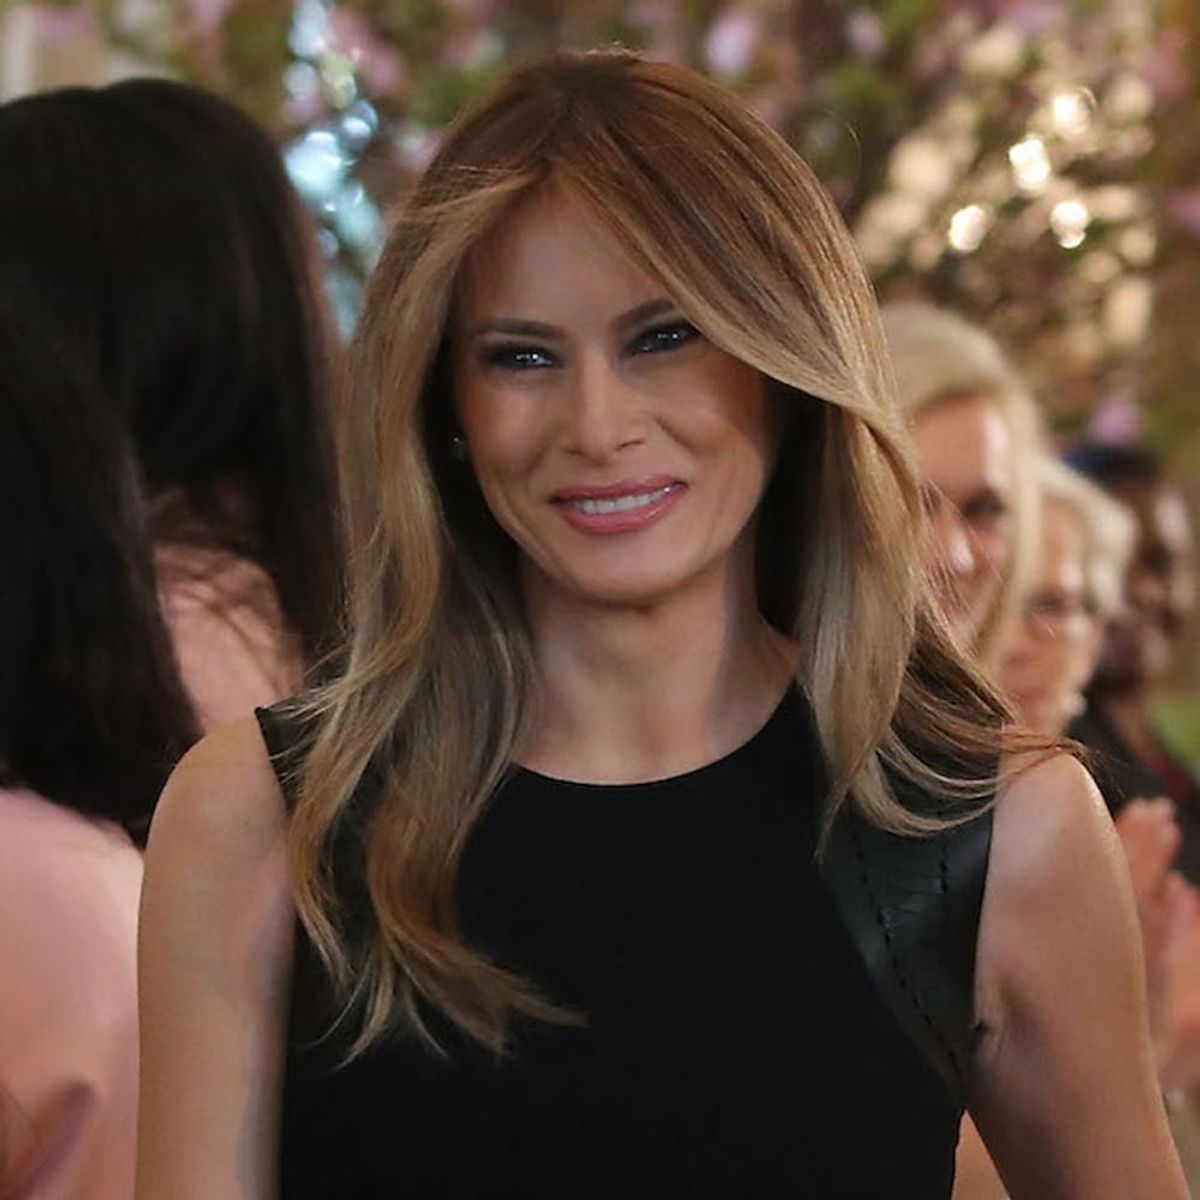 Melania Trump Wore a $2400 LBD to a White House Dinner